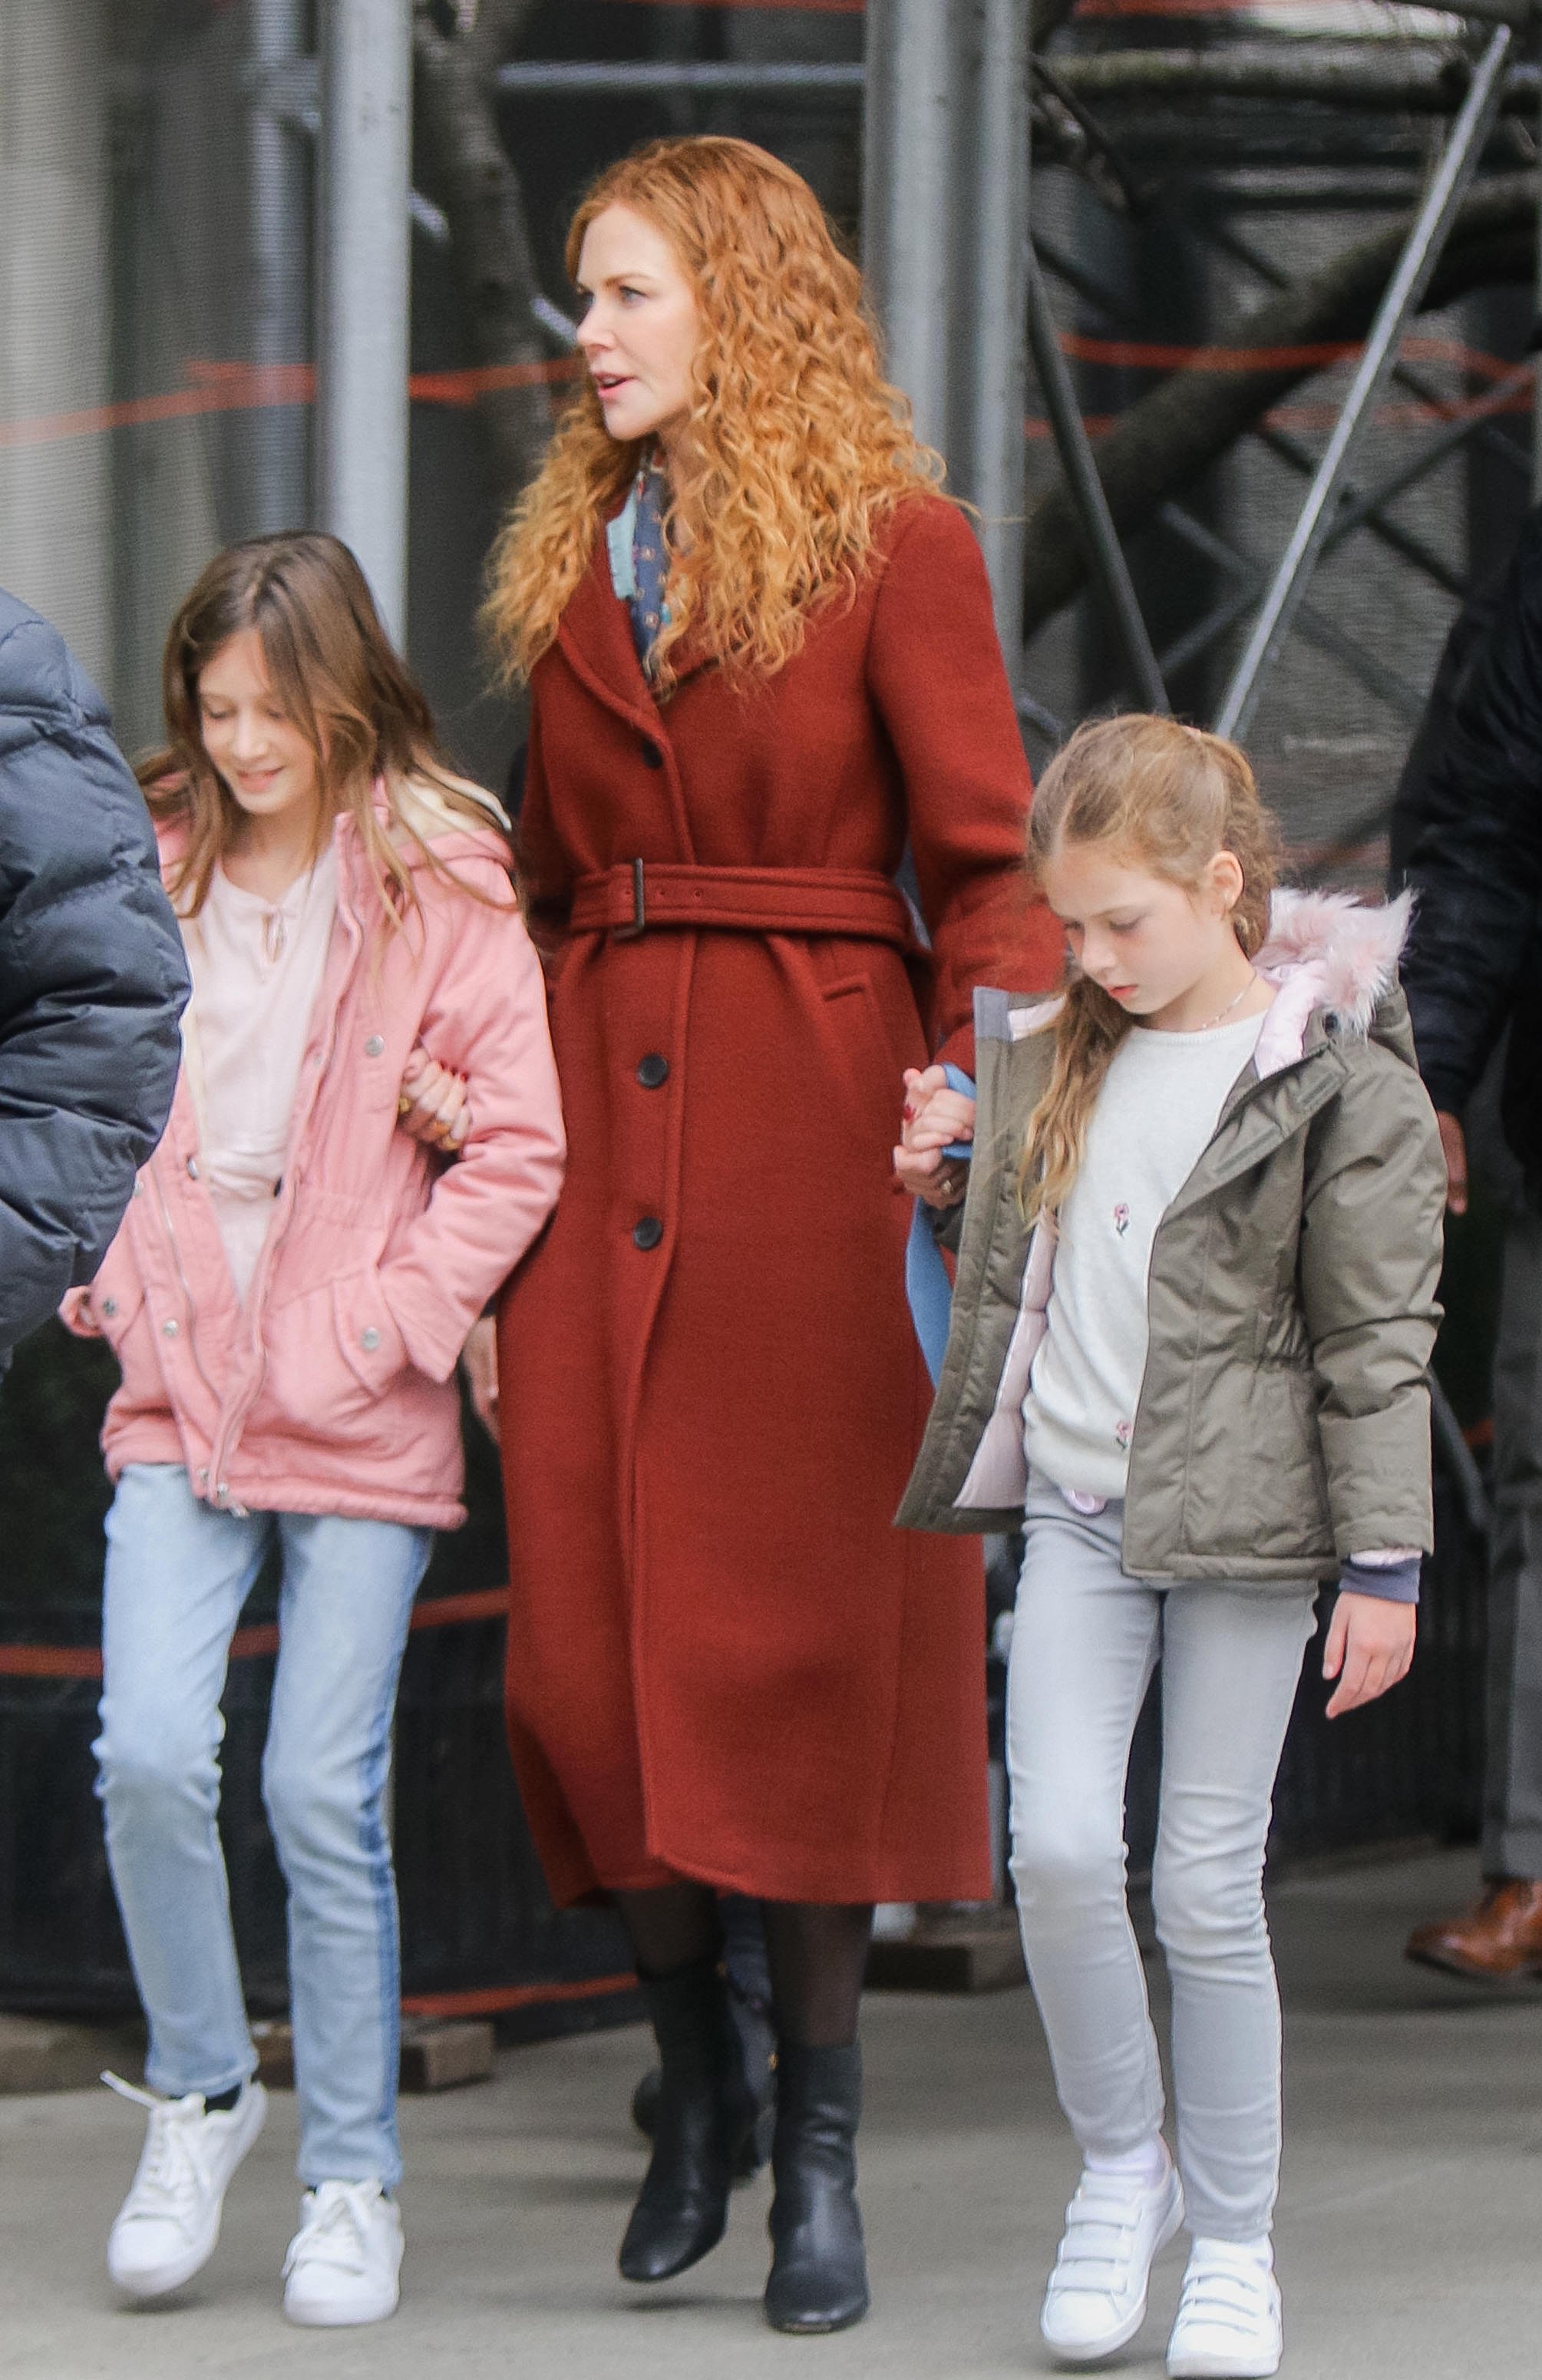 Nicole Kidman and her daughters, Faith and Sunday pictured on March 29, 2019 in New York City | Photo: Getty Images